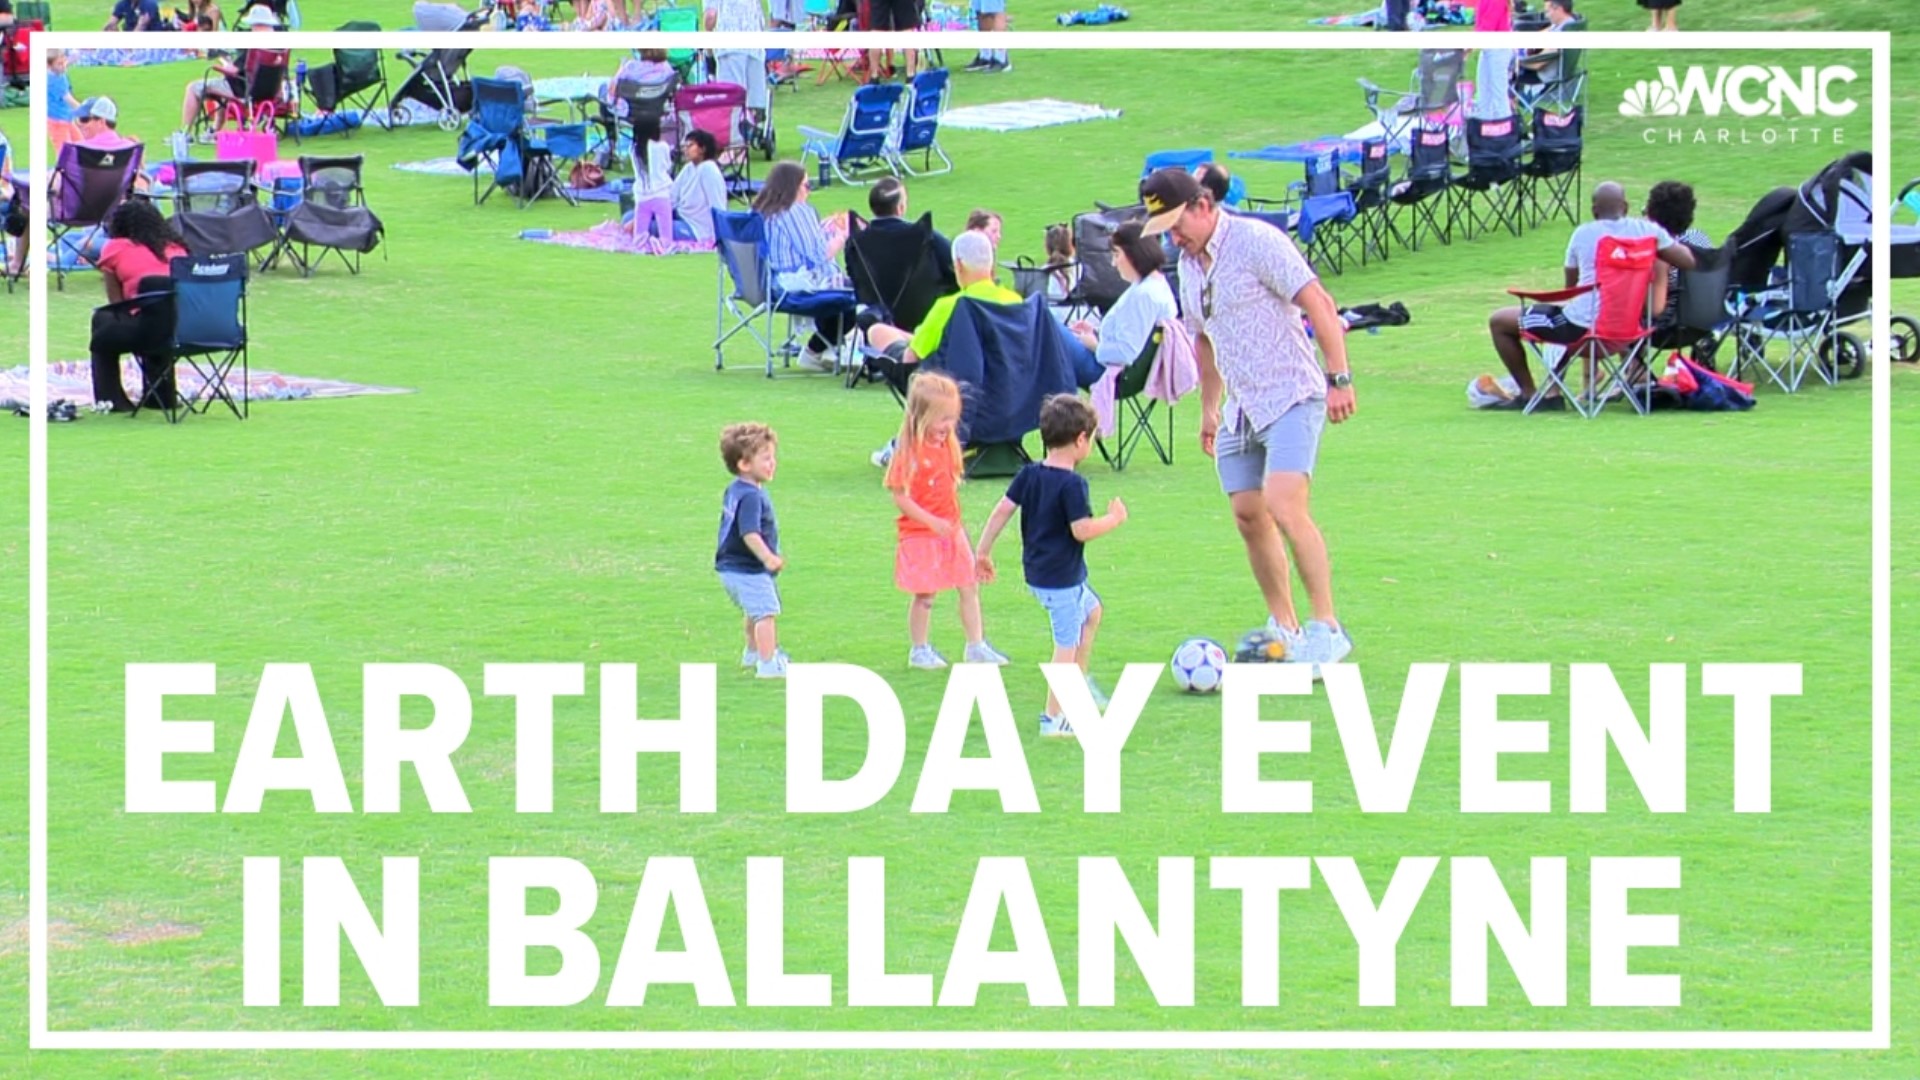 Folks in Ballantyne started celebrating Earth Day a little early with a movie night in Brixham Park on Friday.